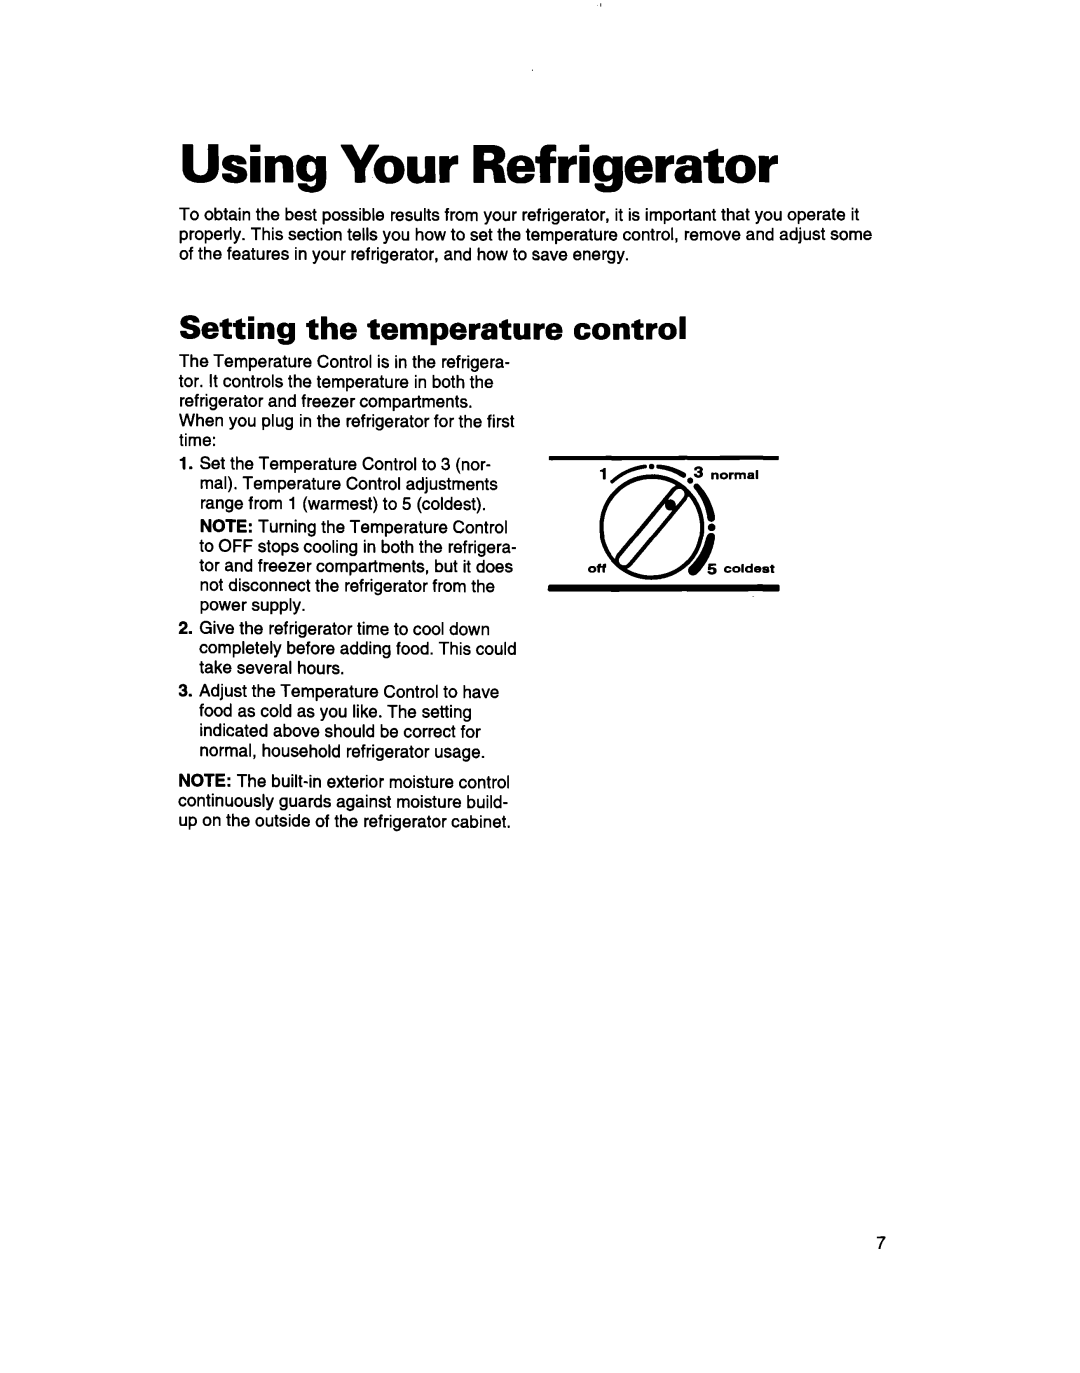 Whirlpool TT14DKXBN11 warranty Using Your Refrigerator, Setting the temperature control 